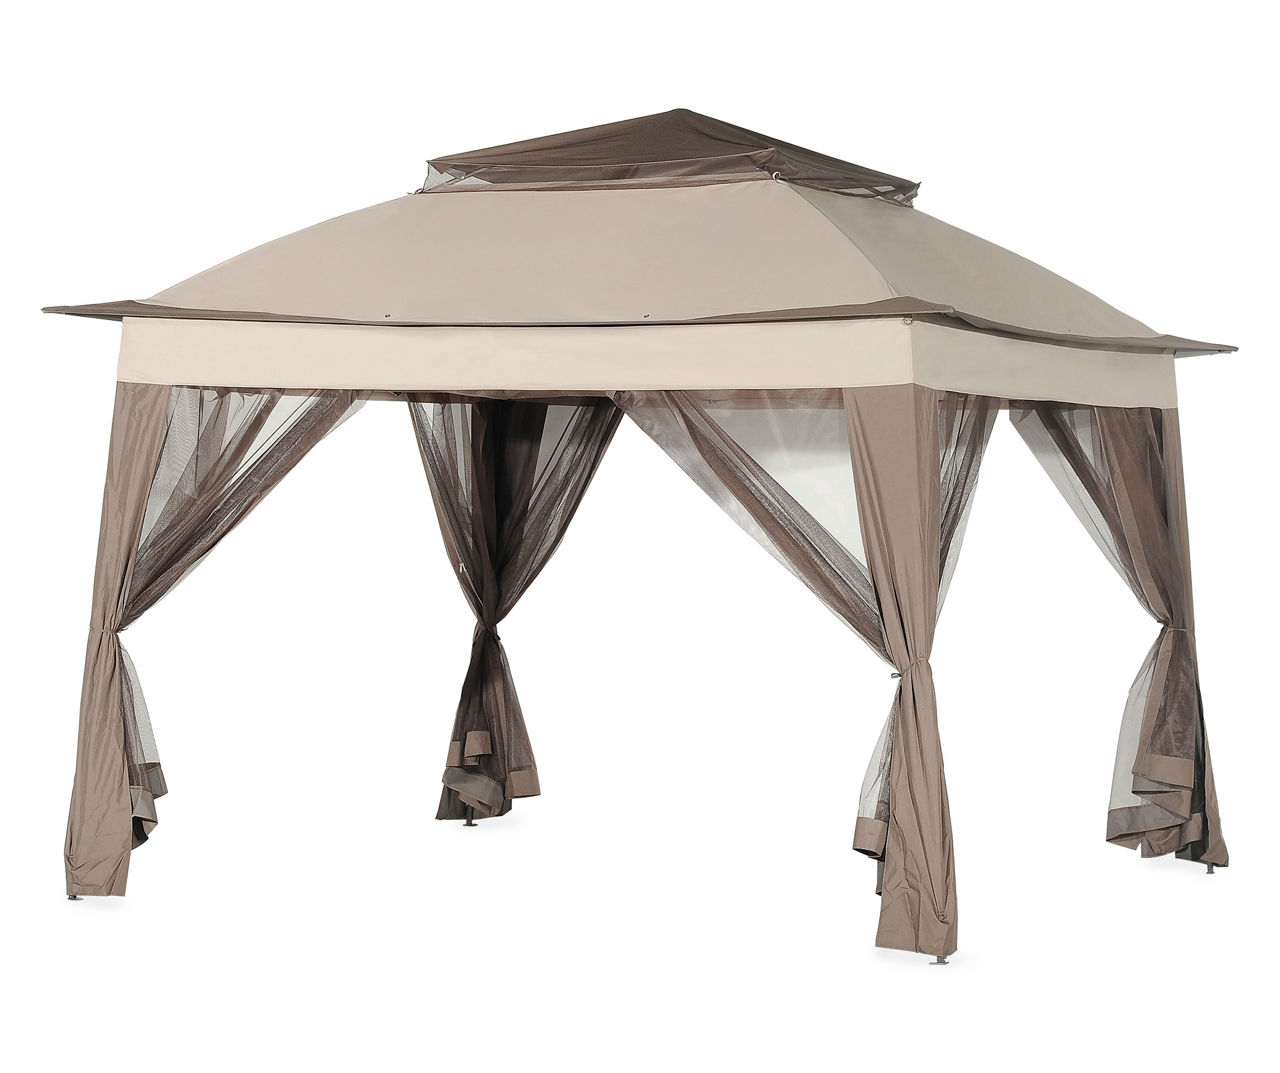 Tan Pop Up Canopy with Netting, (11' x 11')